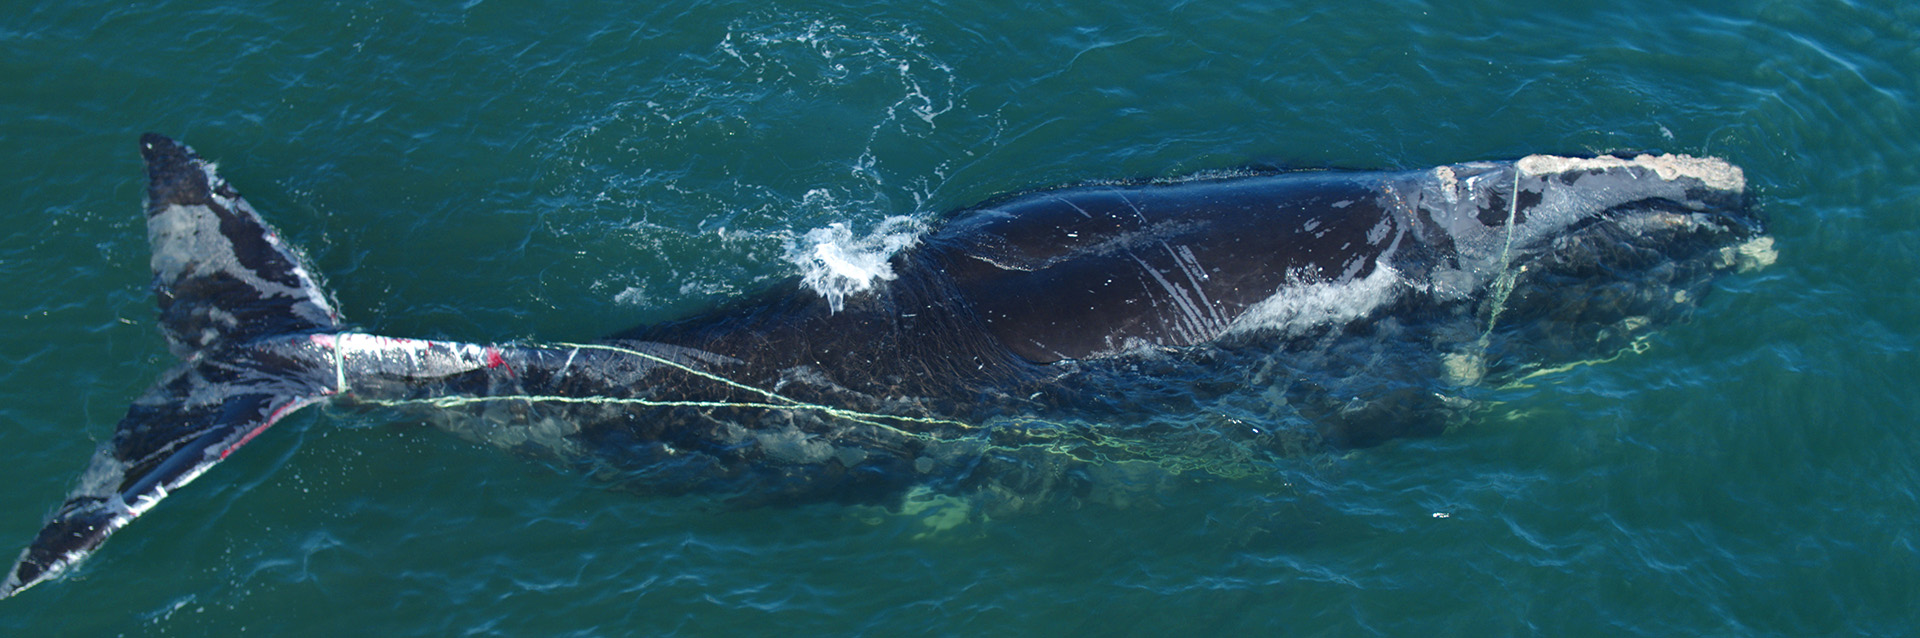 North Atlantic Right Whale #4615 entangled in rope